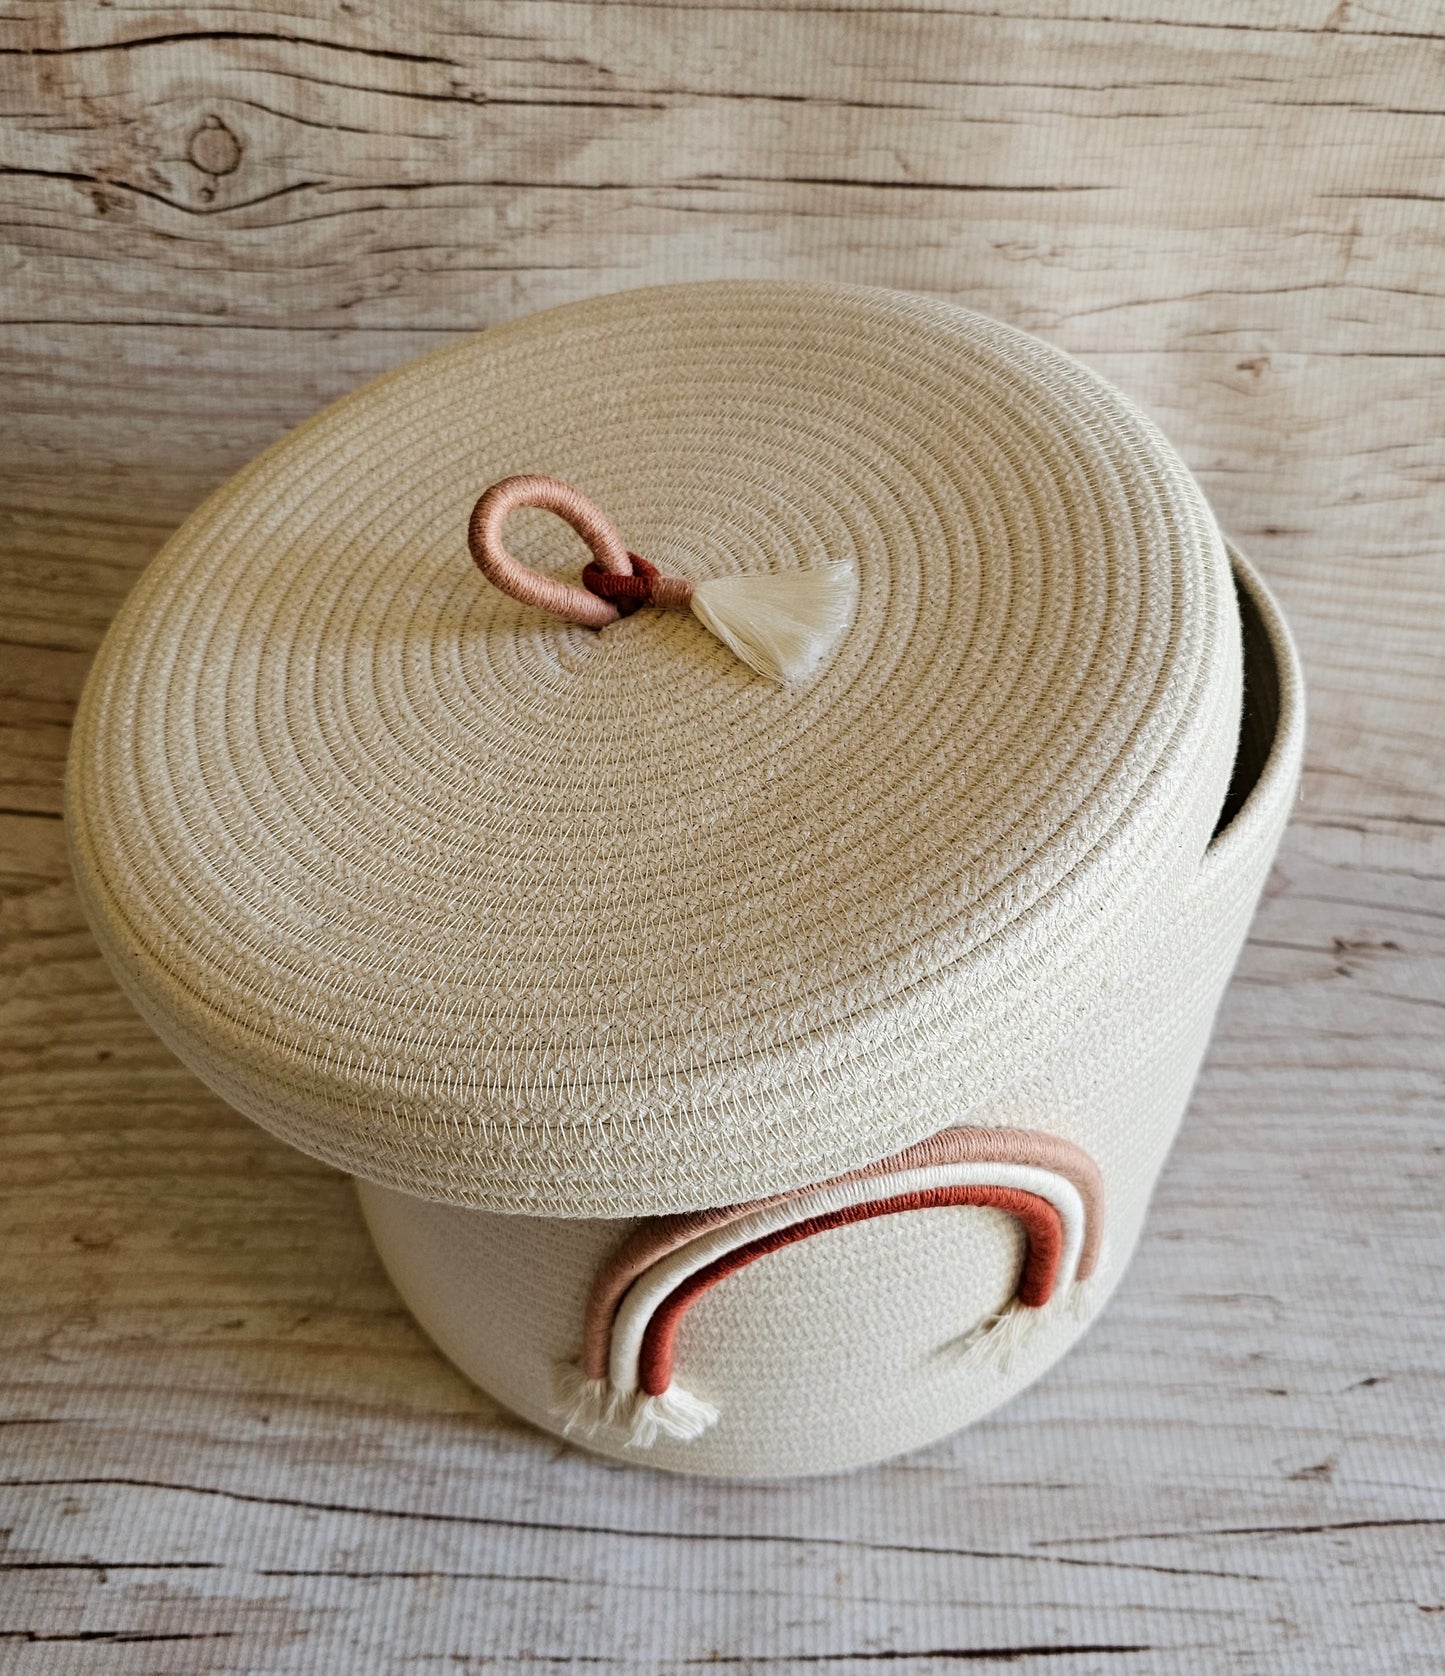 Rainbow rope basket - with lid